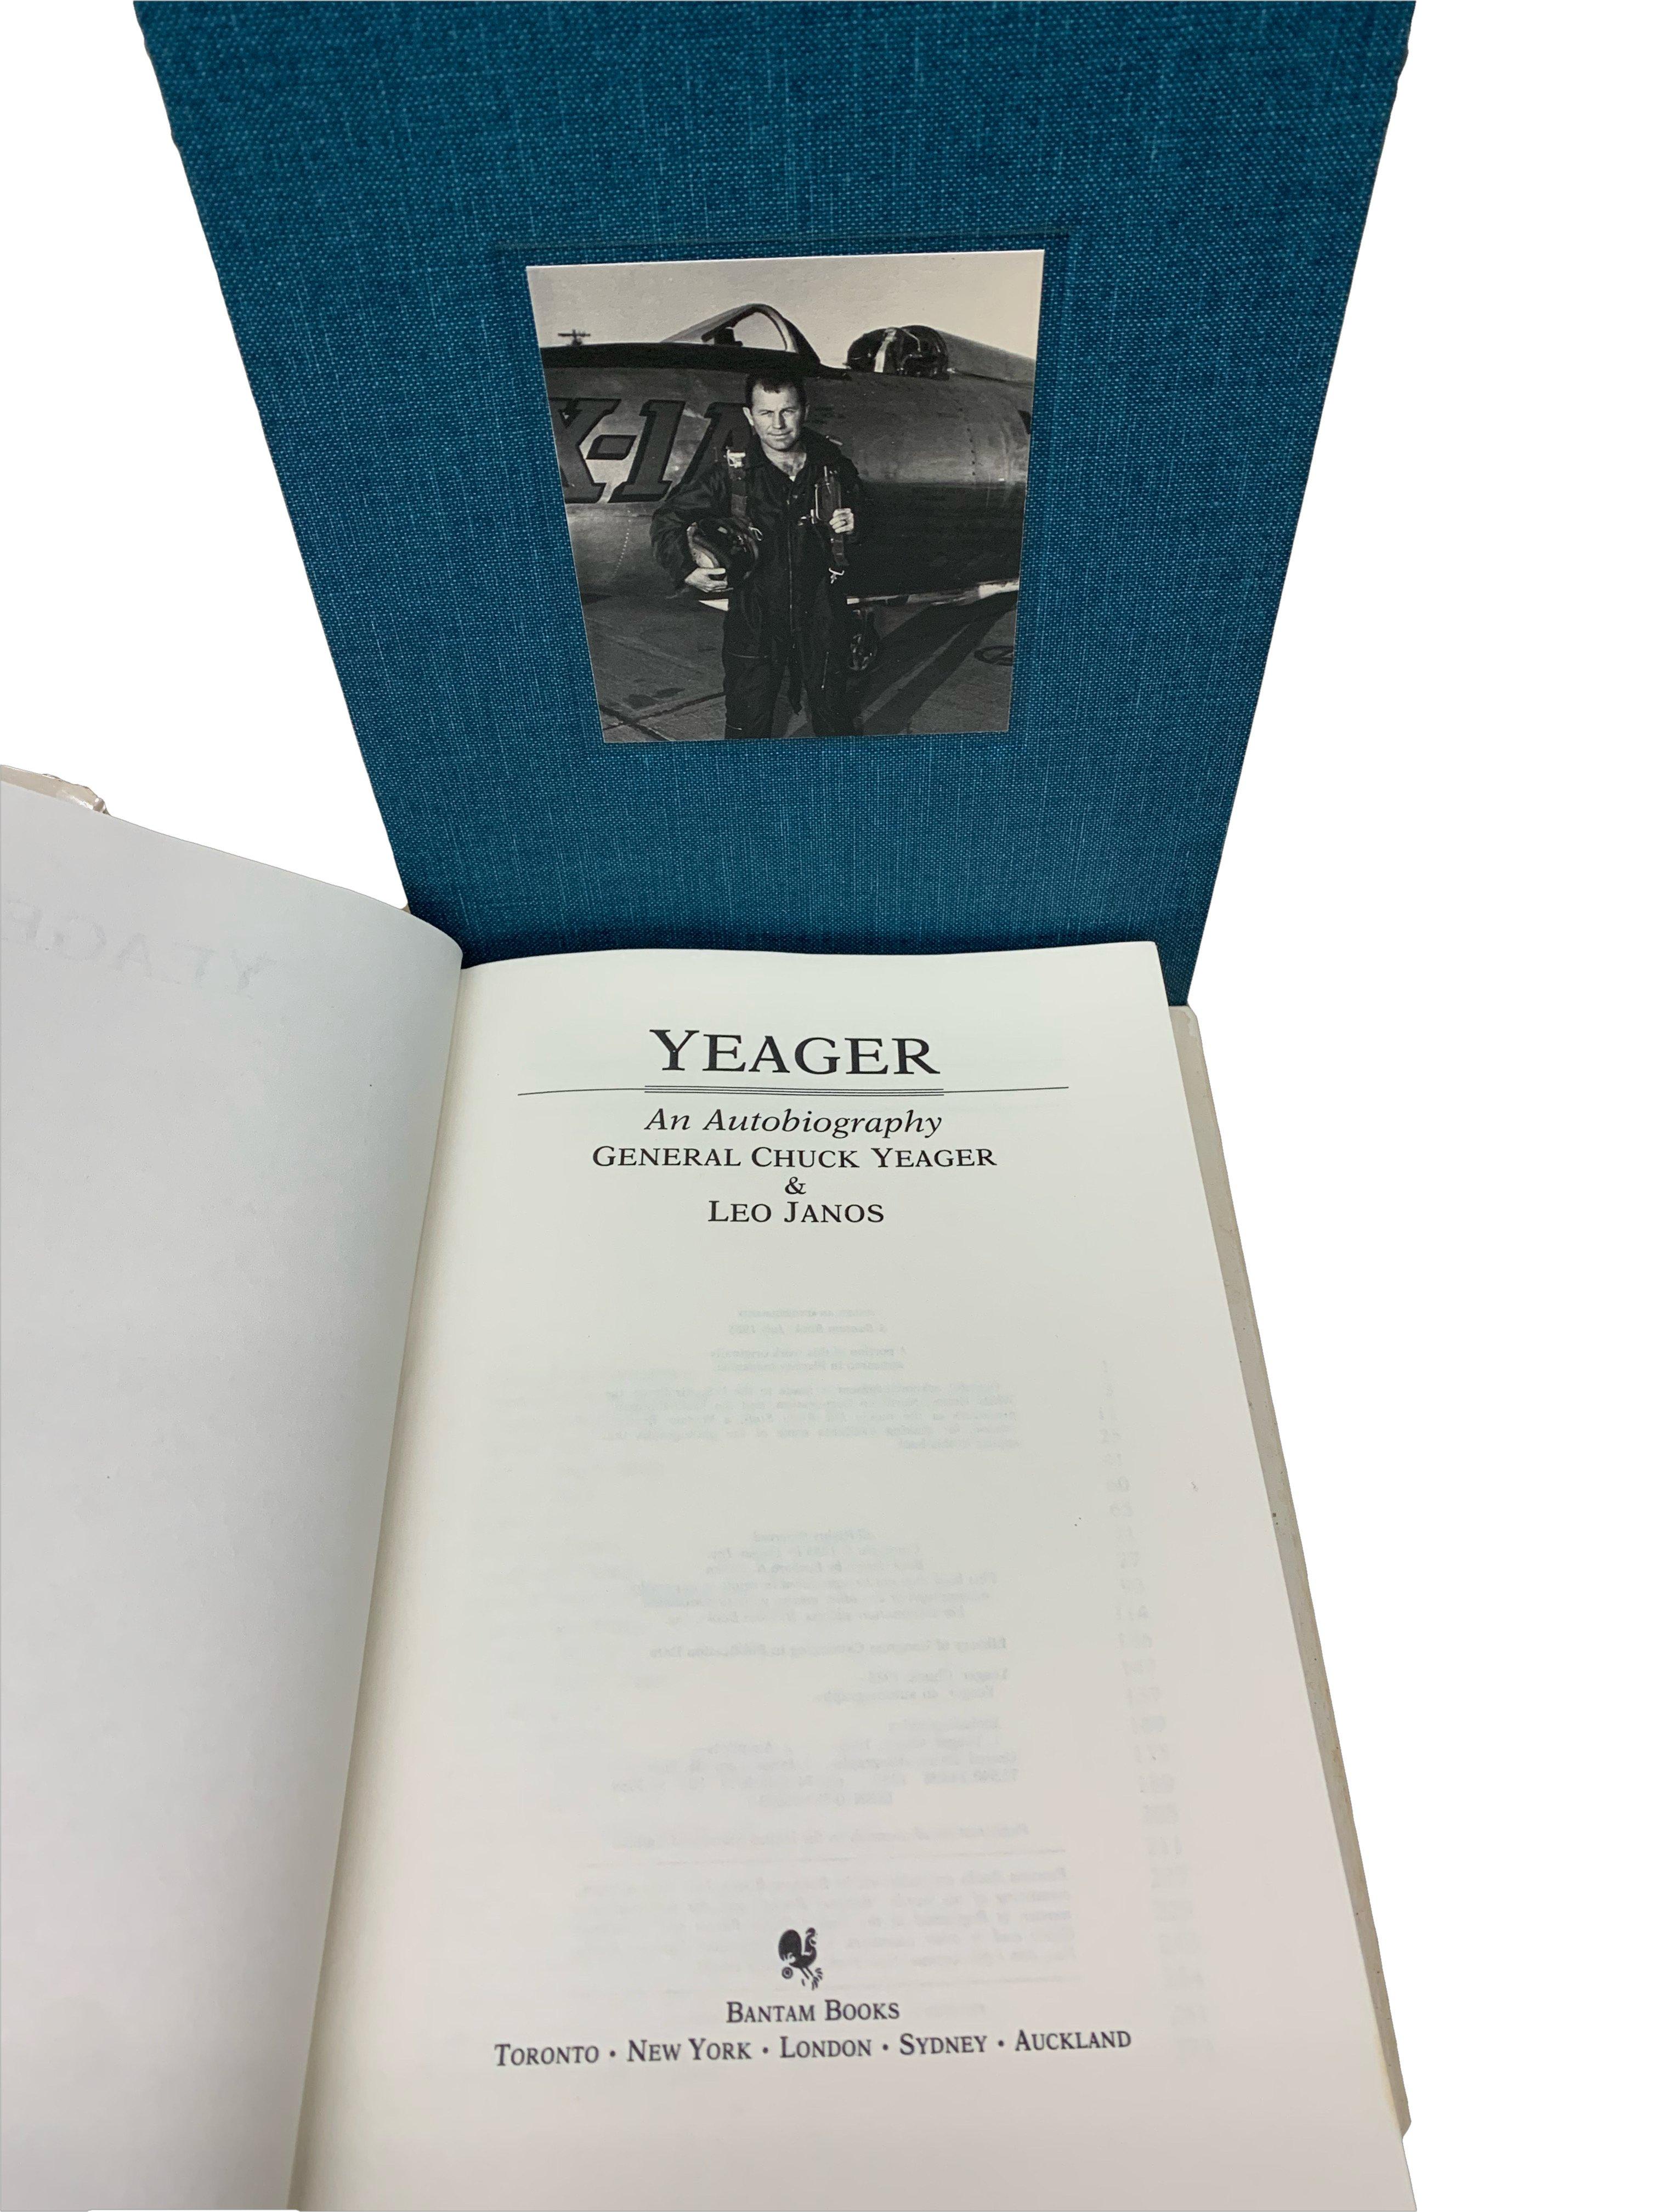 North American Yeager, An Autobiography by Chuck Yeager and Leo Janos, Signed by Chuck Yeager